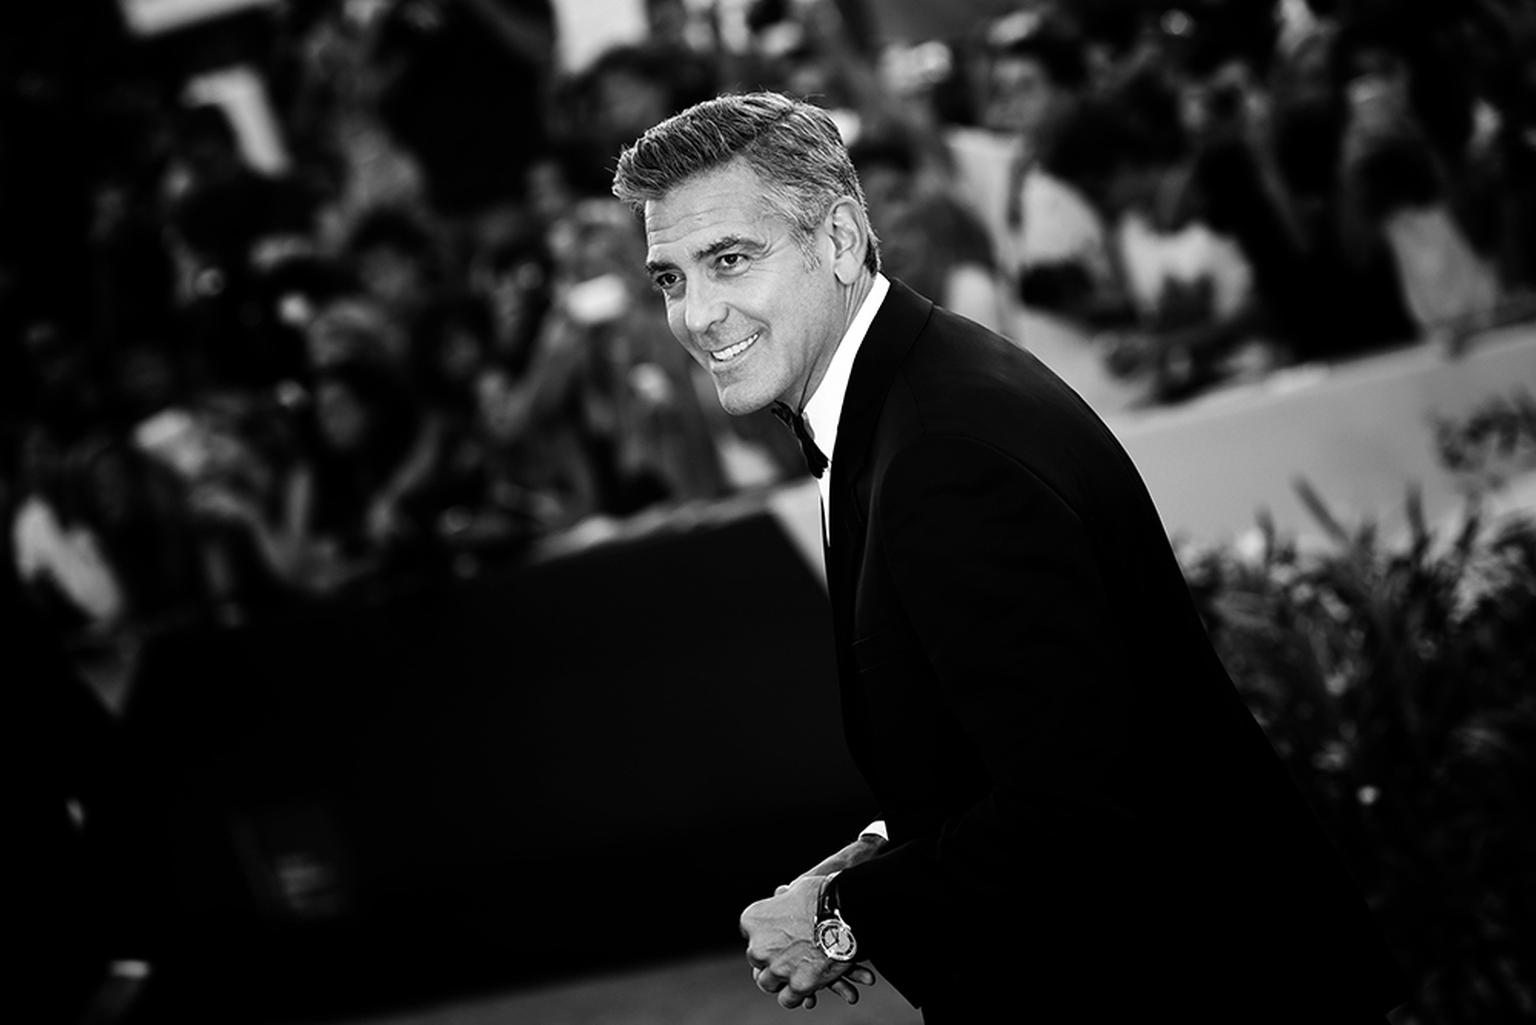 Omega ambassador George Clooney, pictured wearing an Omega De Ville Hour Vision watch at the Venice Film Festival 2013, married Amal Alamuddin this weekend in Venice wearing an Omega De Ville Trésor watch.